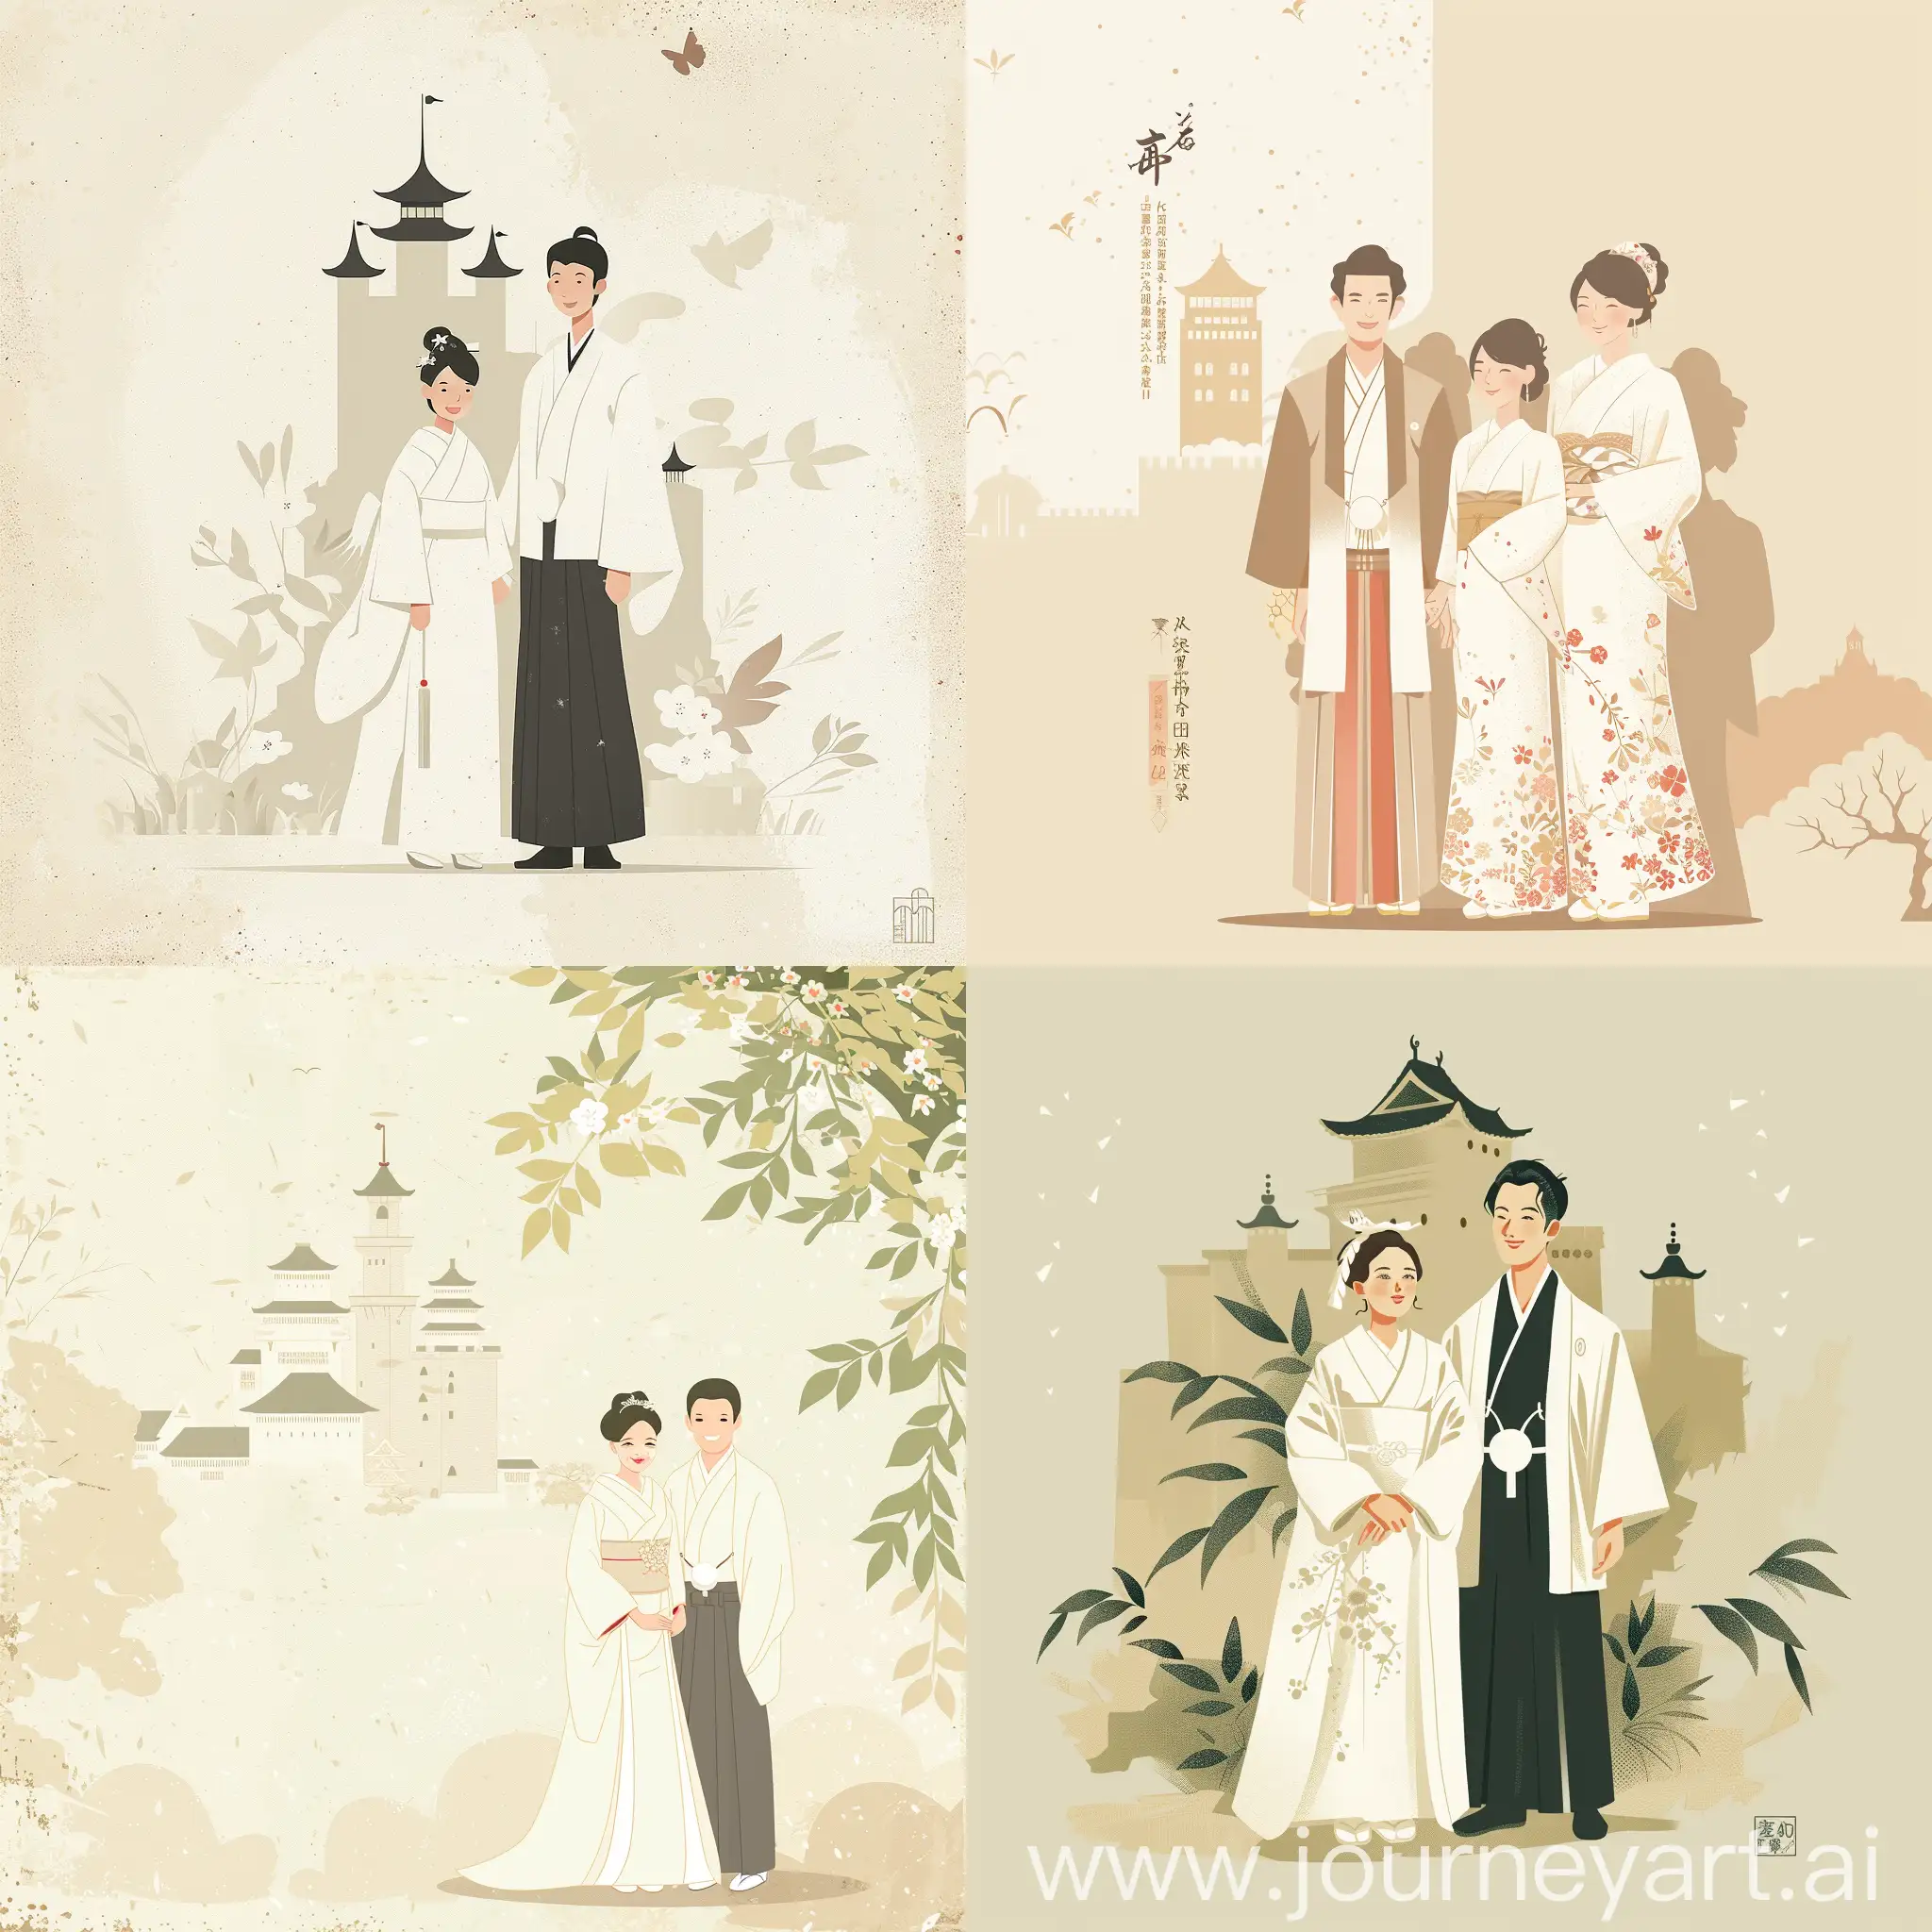 Japanese-Cottagecore-Wedding-Invitation-Pure-Bride-and-Groom-in-Traditional-Affectionate-Embrace